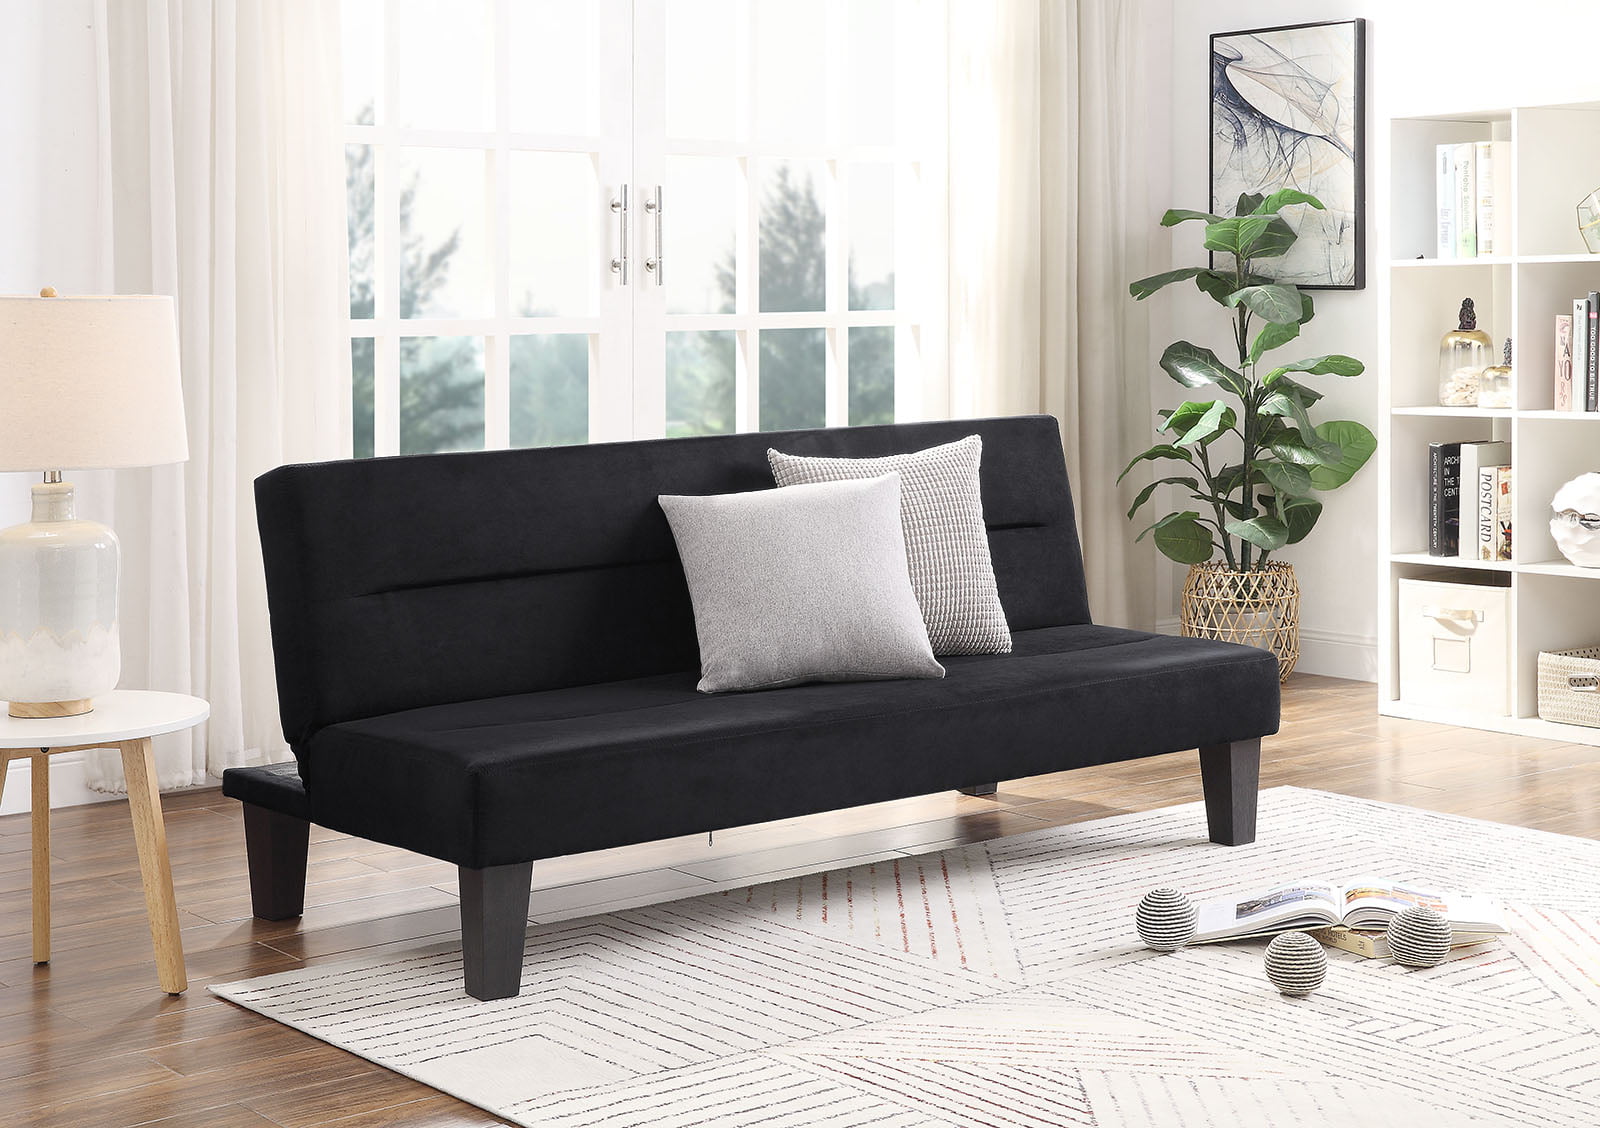 LuxuryGoods Modern Futon Couch with Black Microfiber Cover Sleeper  